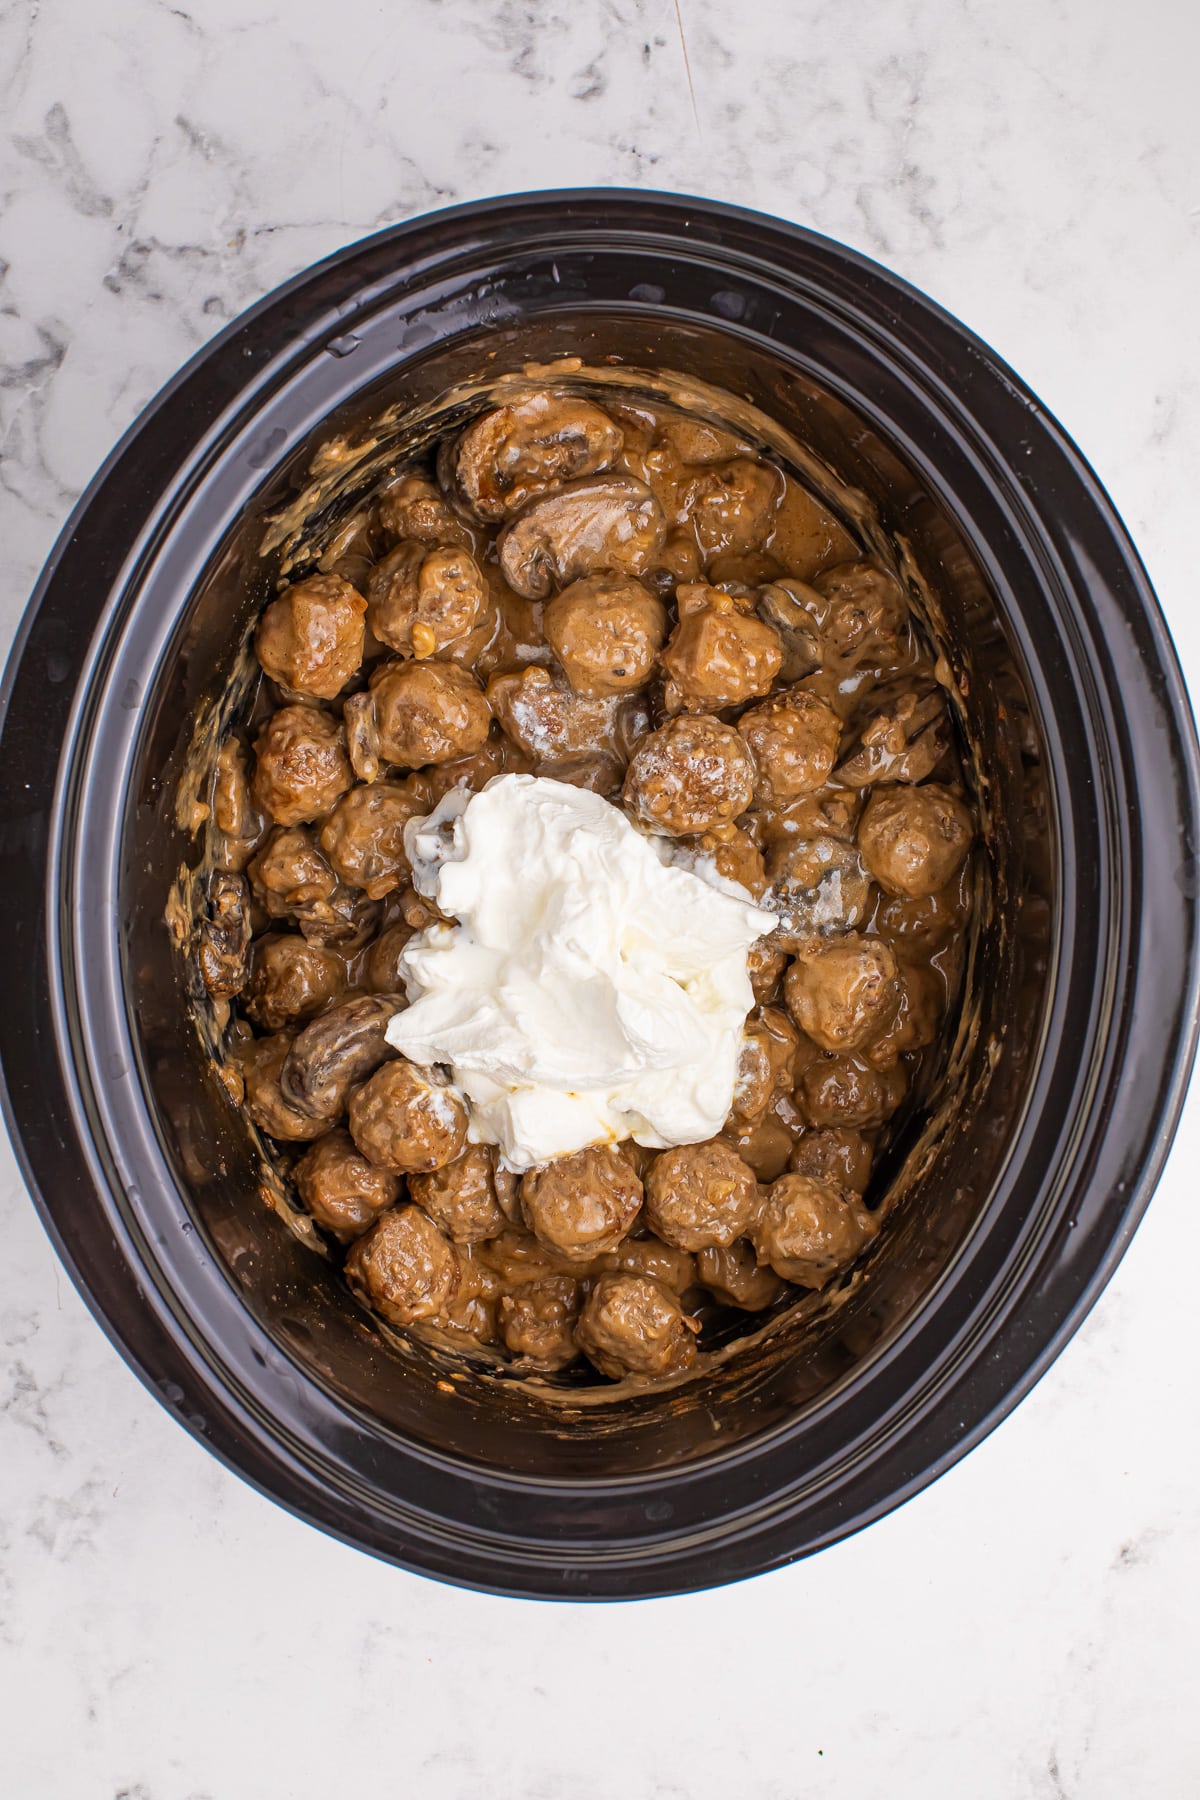 A crock pot filled with meatballs in sauce with a large amount of sour cream on top being mixed in.